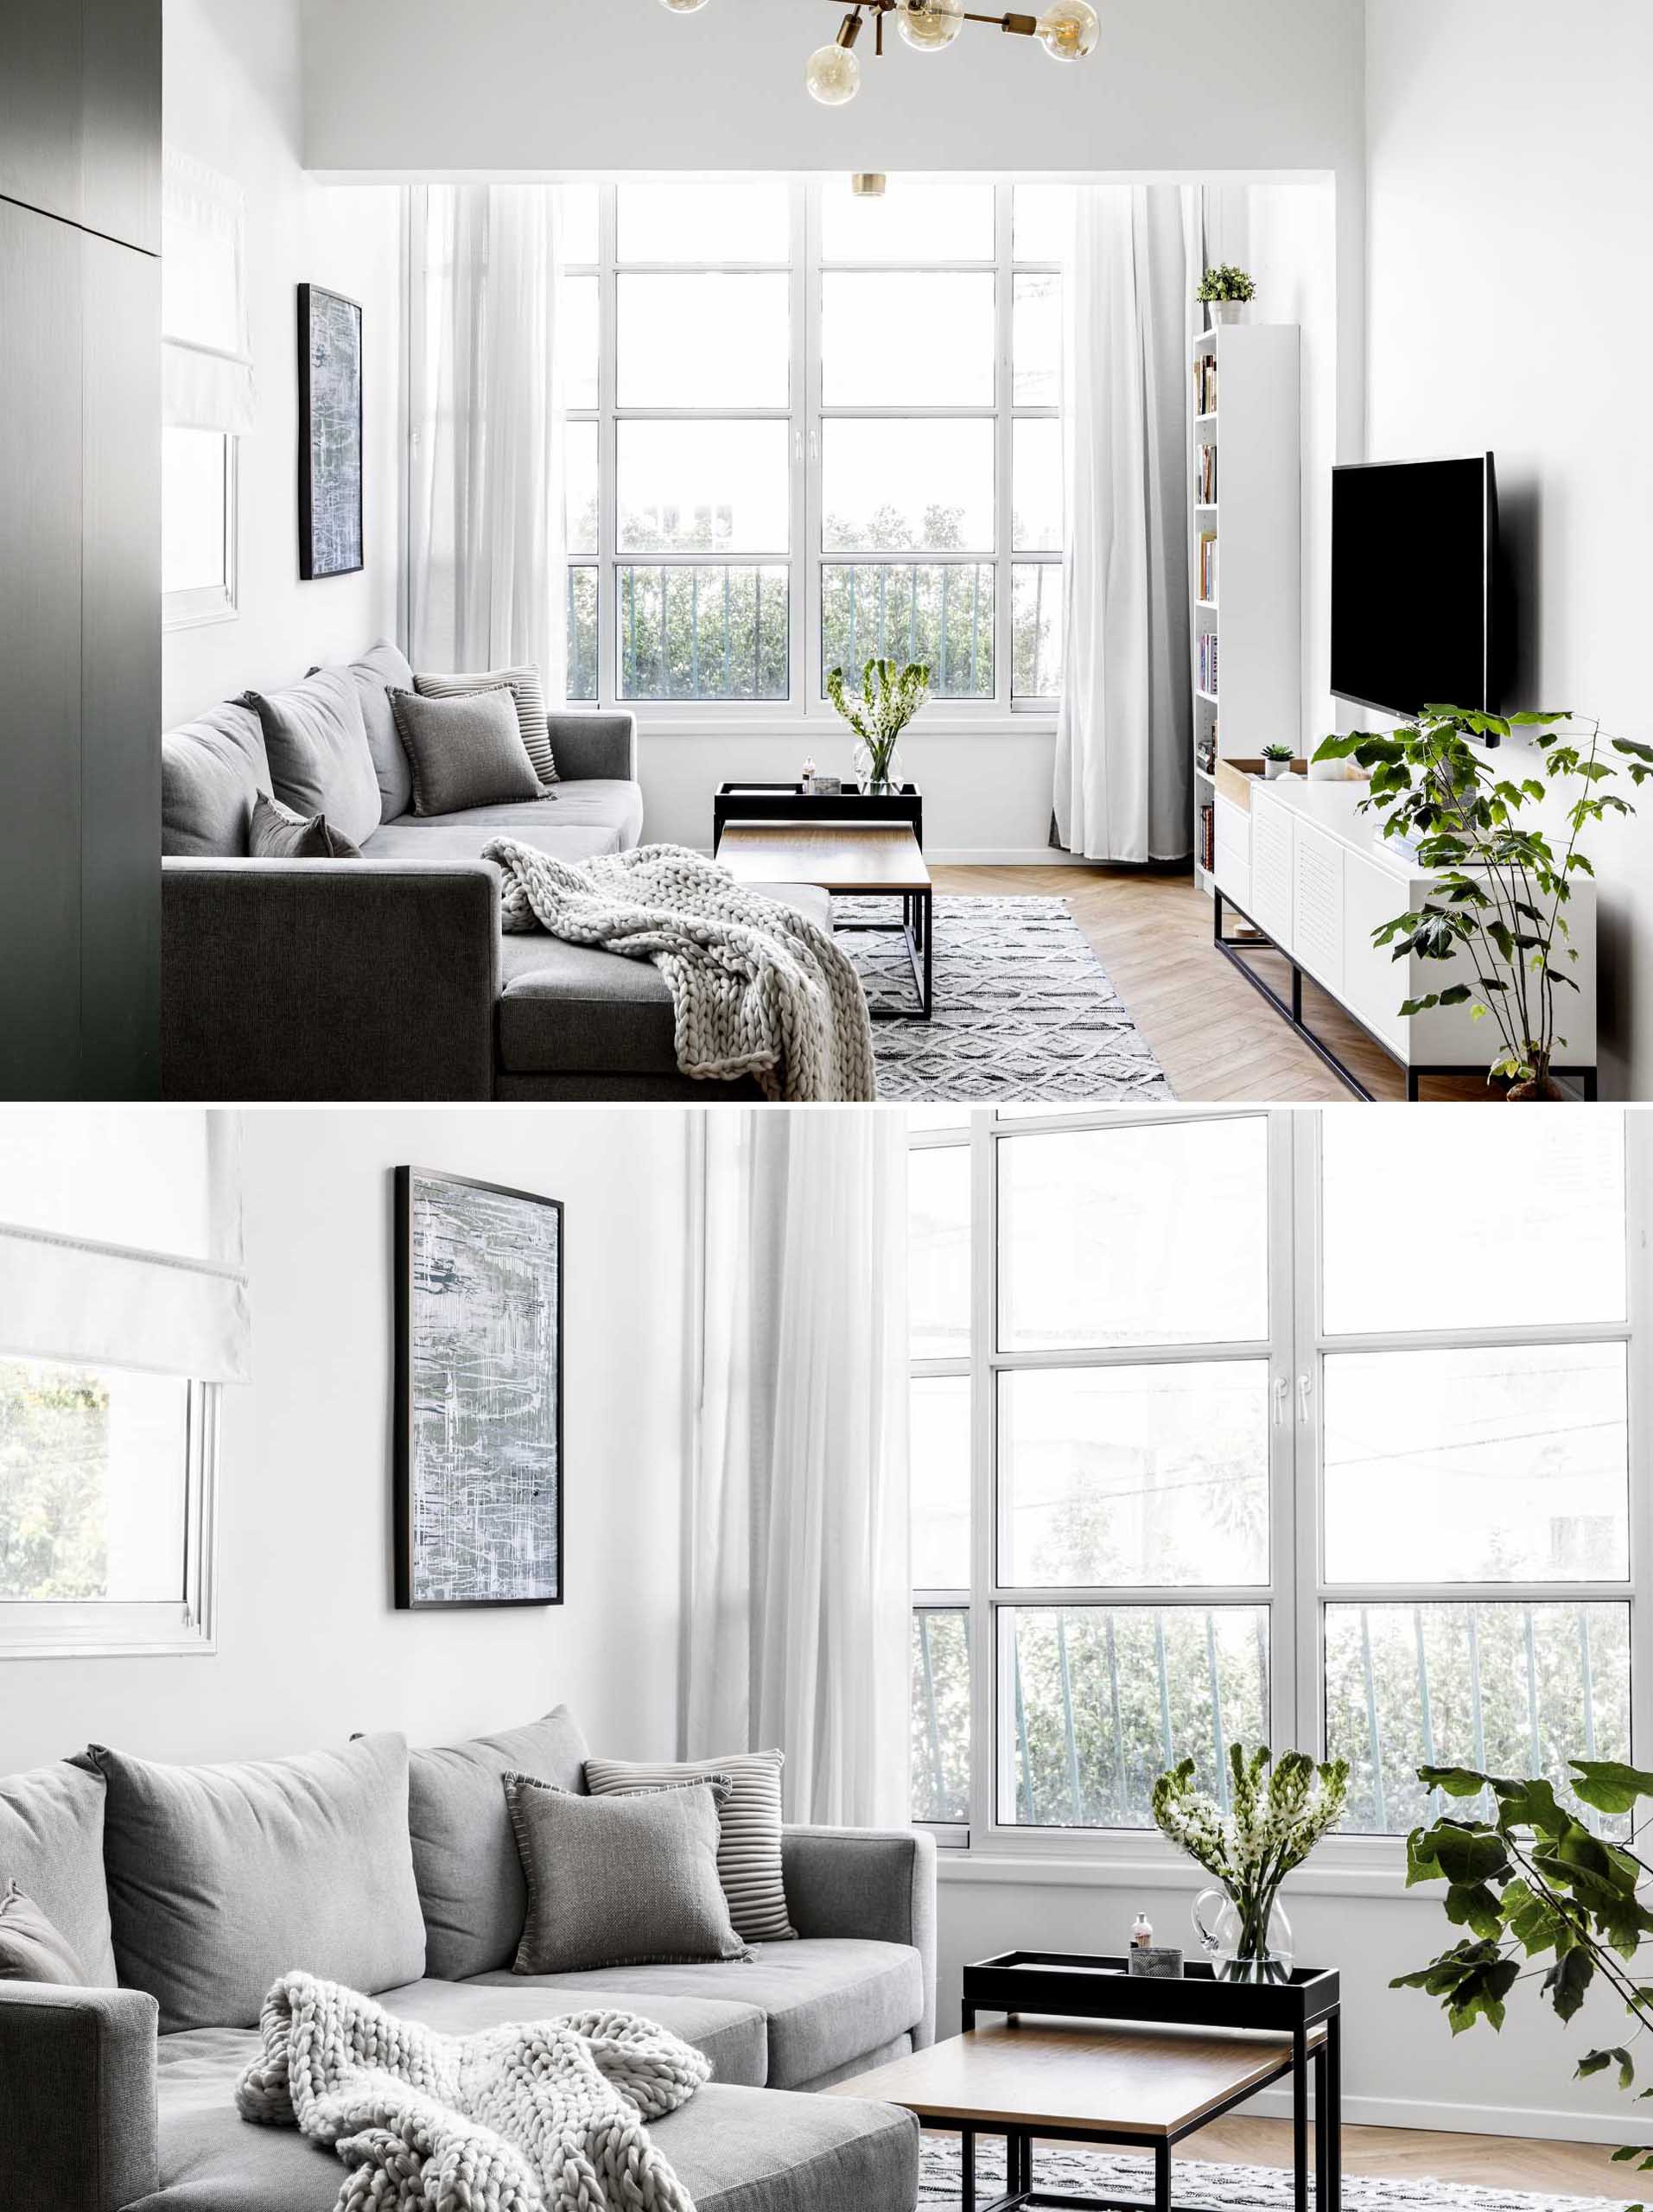 A modern living room with plenty of natural light, a grey couch, and plants.